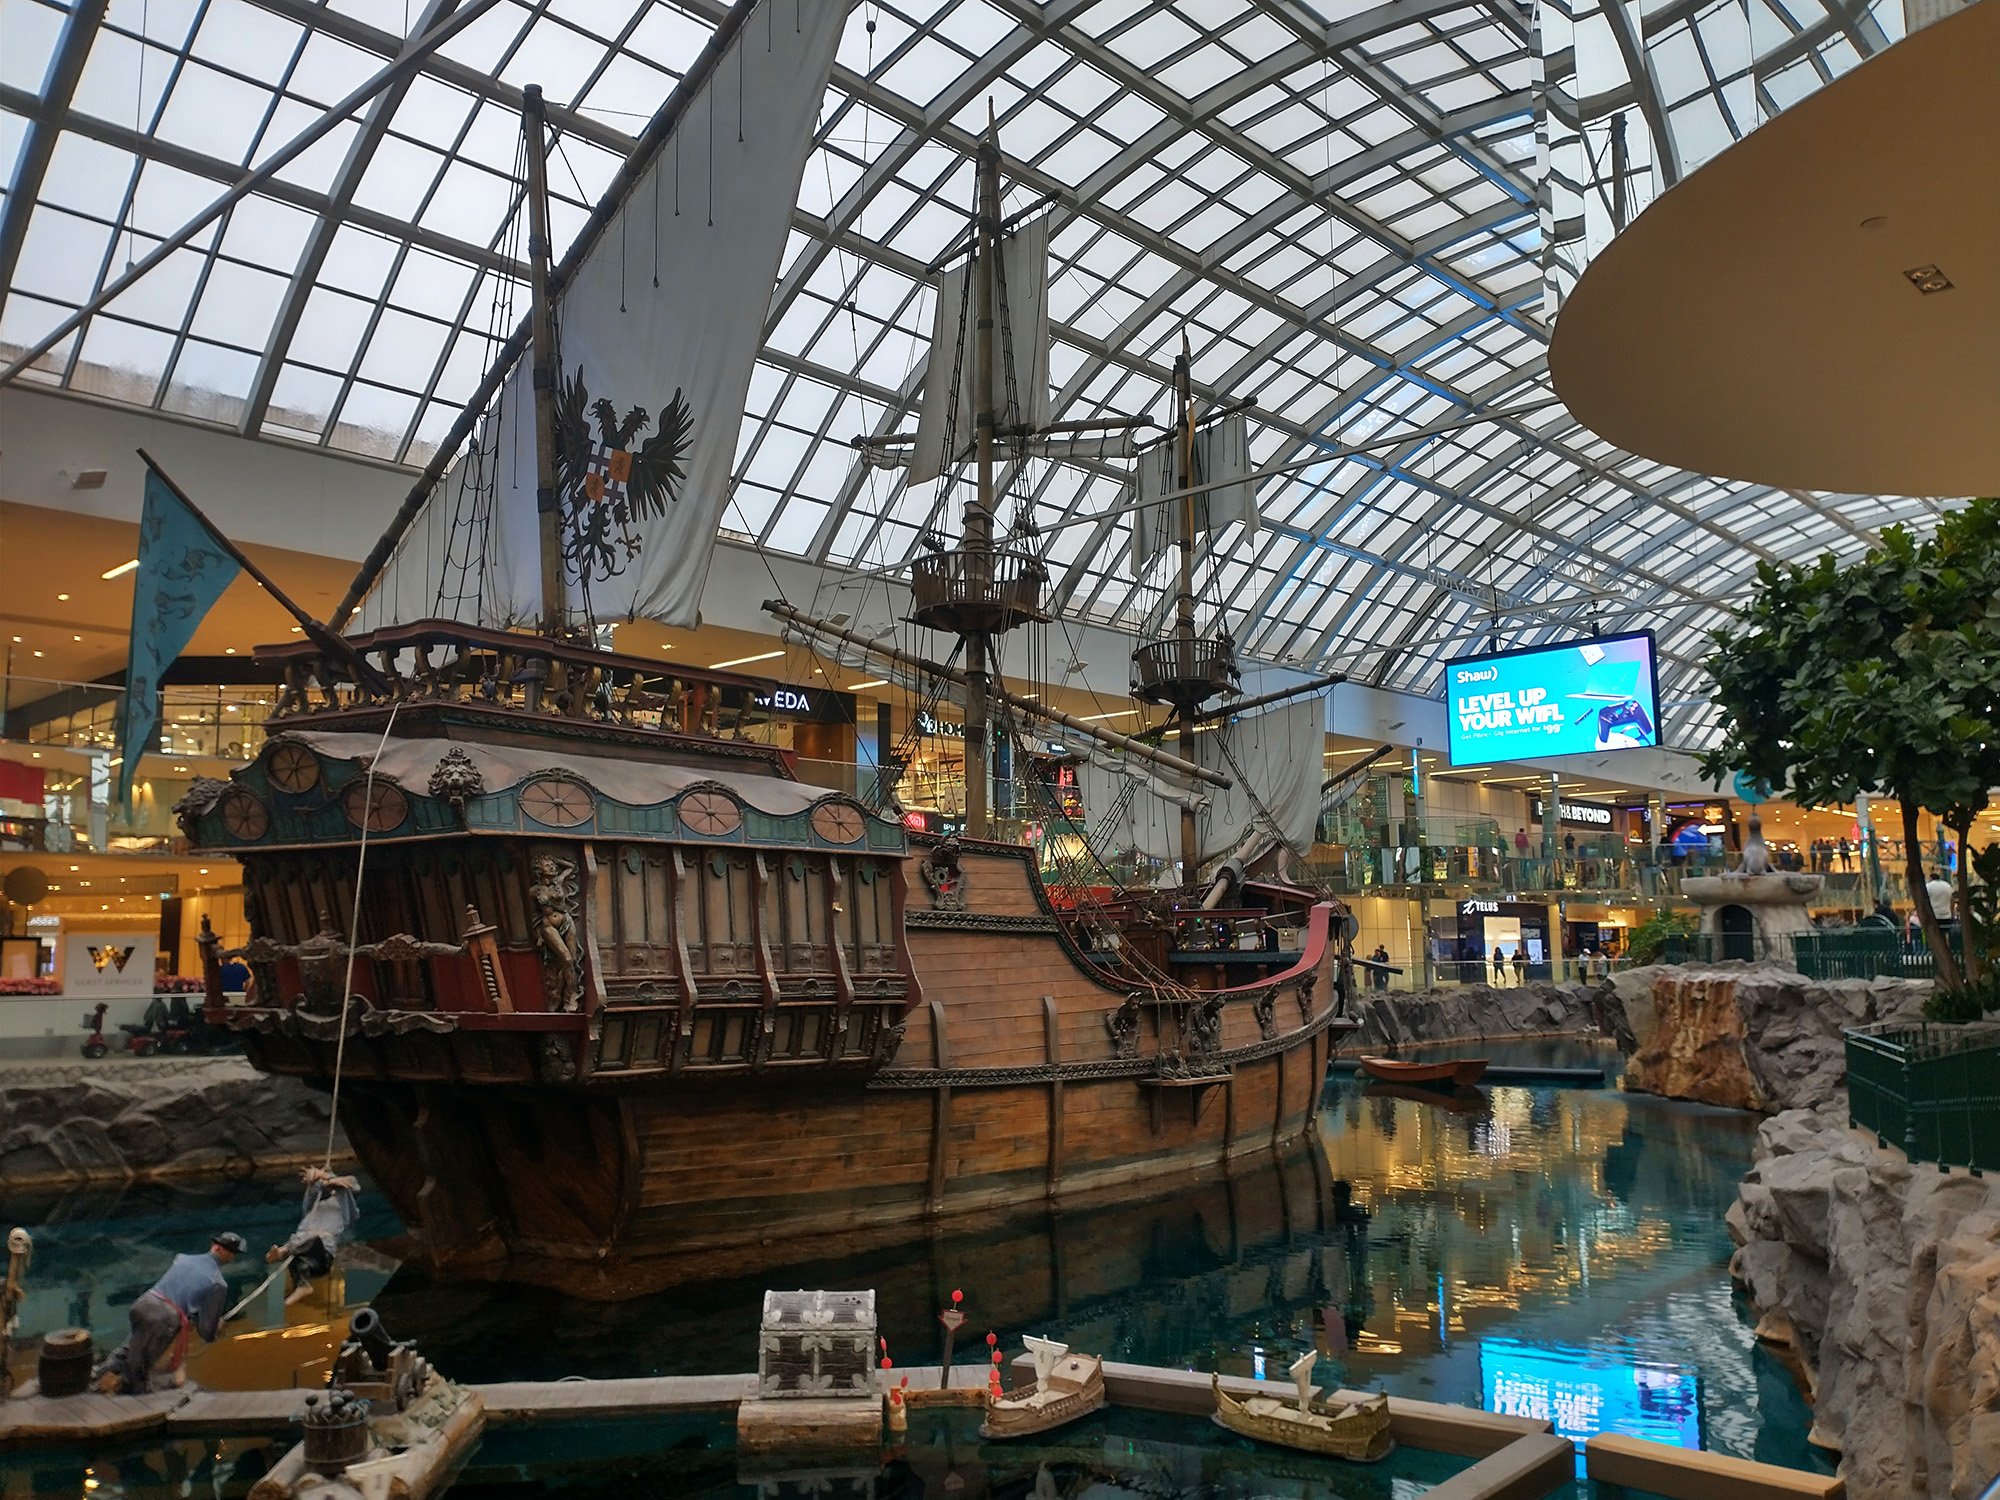 There's a huge marine park with a pirate ship in the center of the mall. It's quite a sight.